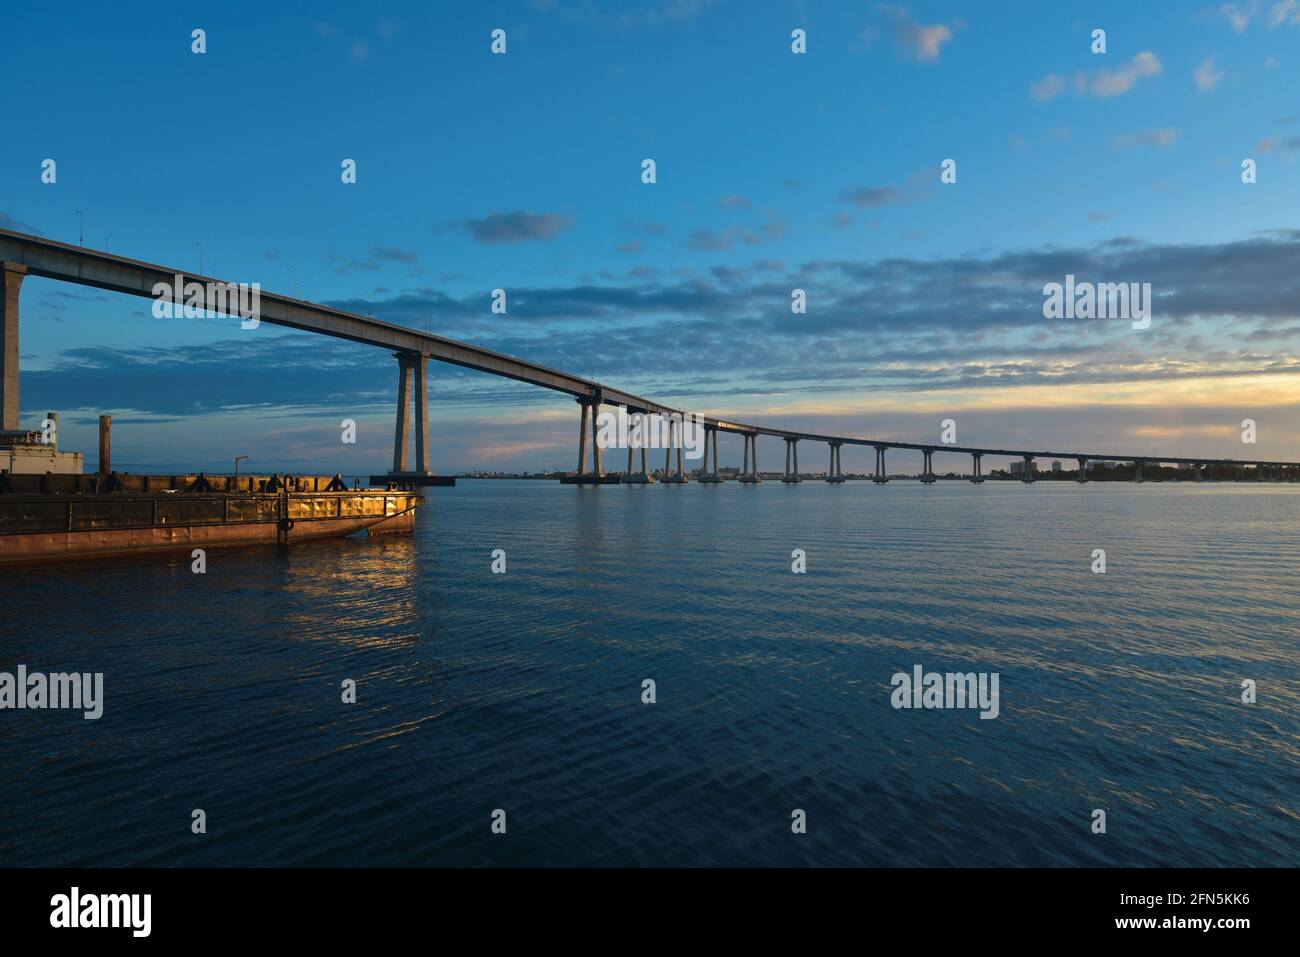 Sunset seascape with panoramic view of Coronado Bridge and a utility crew boat as seen from Cesar Chavez Park in San Diego, California. Stock Photo